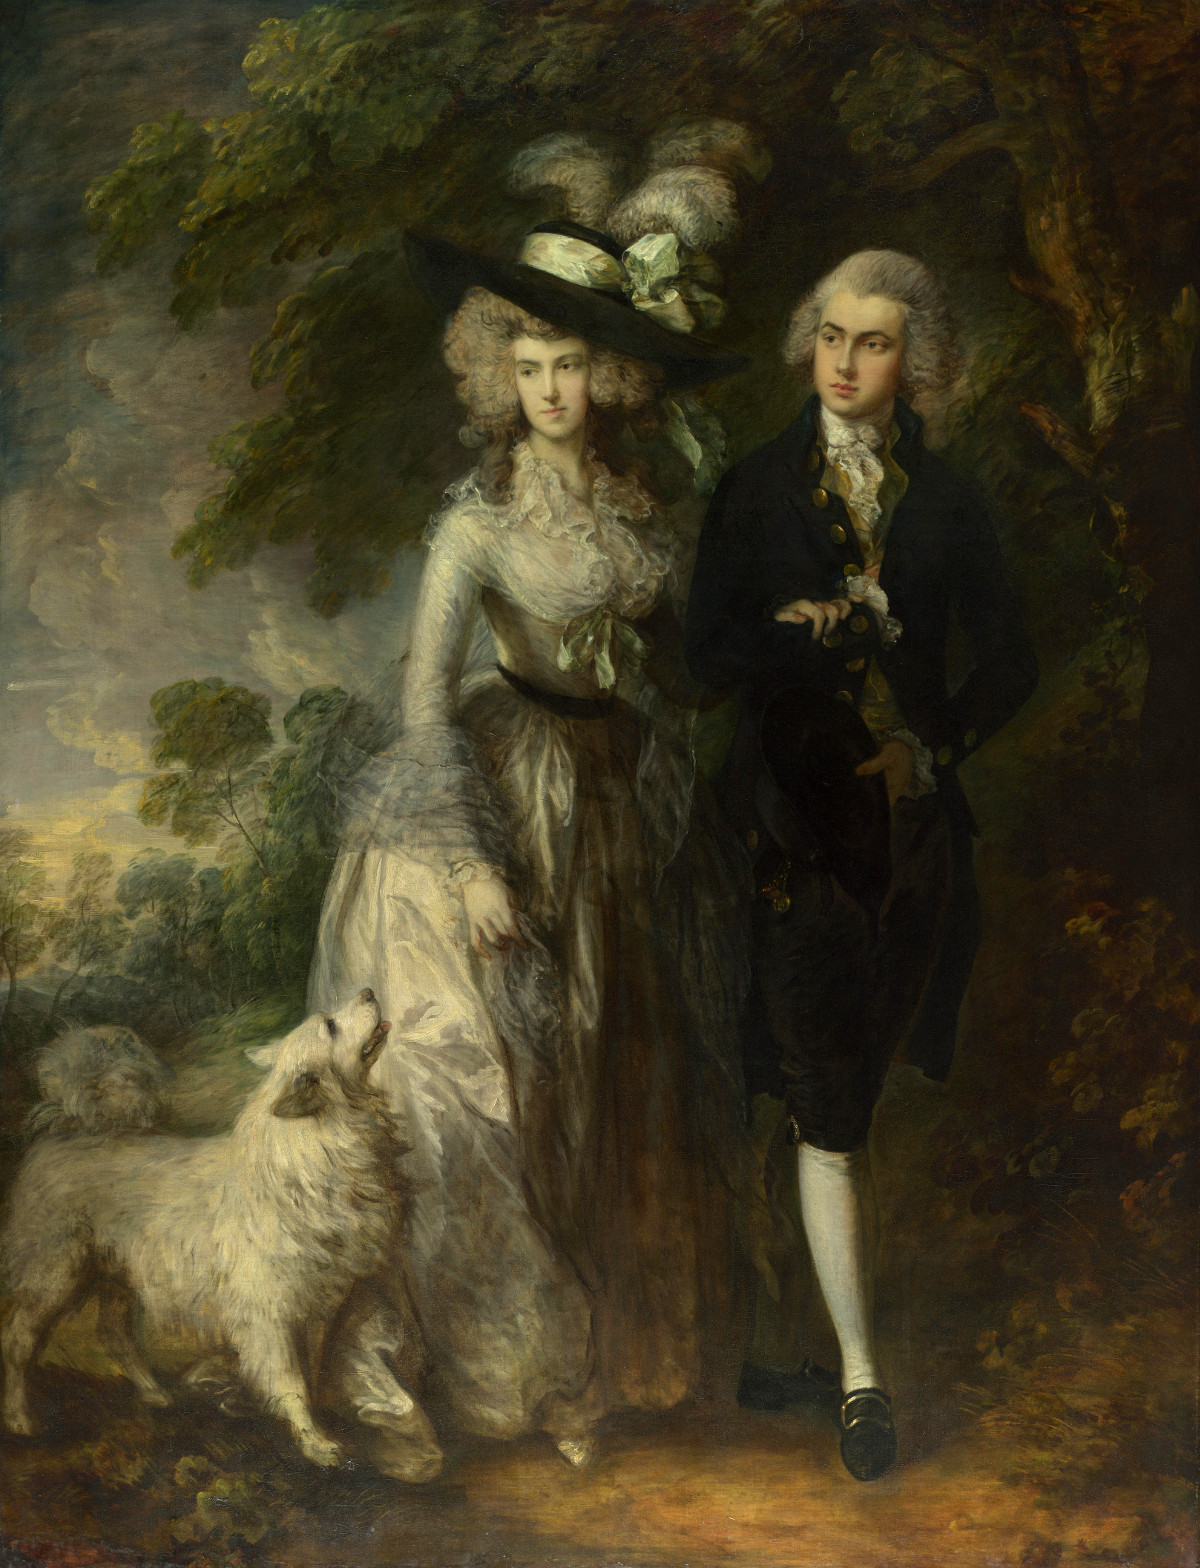 Mr and Mrs William Hallett (“The Morning Walk”) by Thomas Gainsborough, 1785